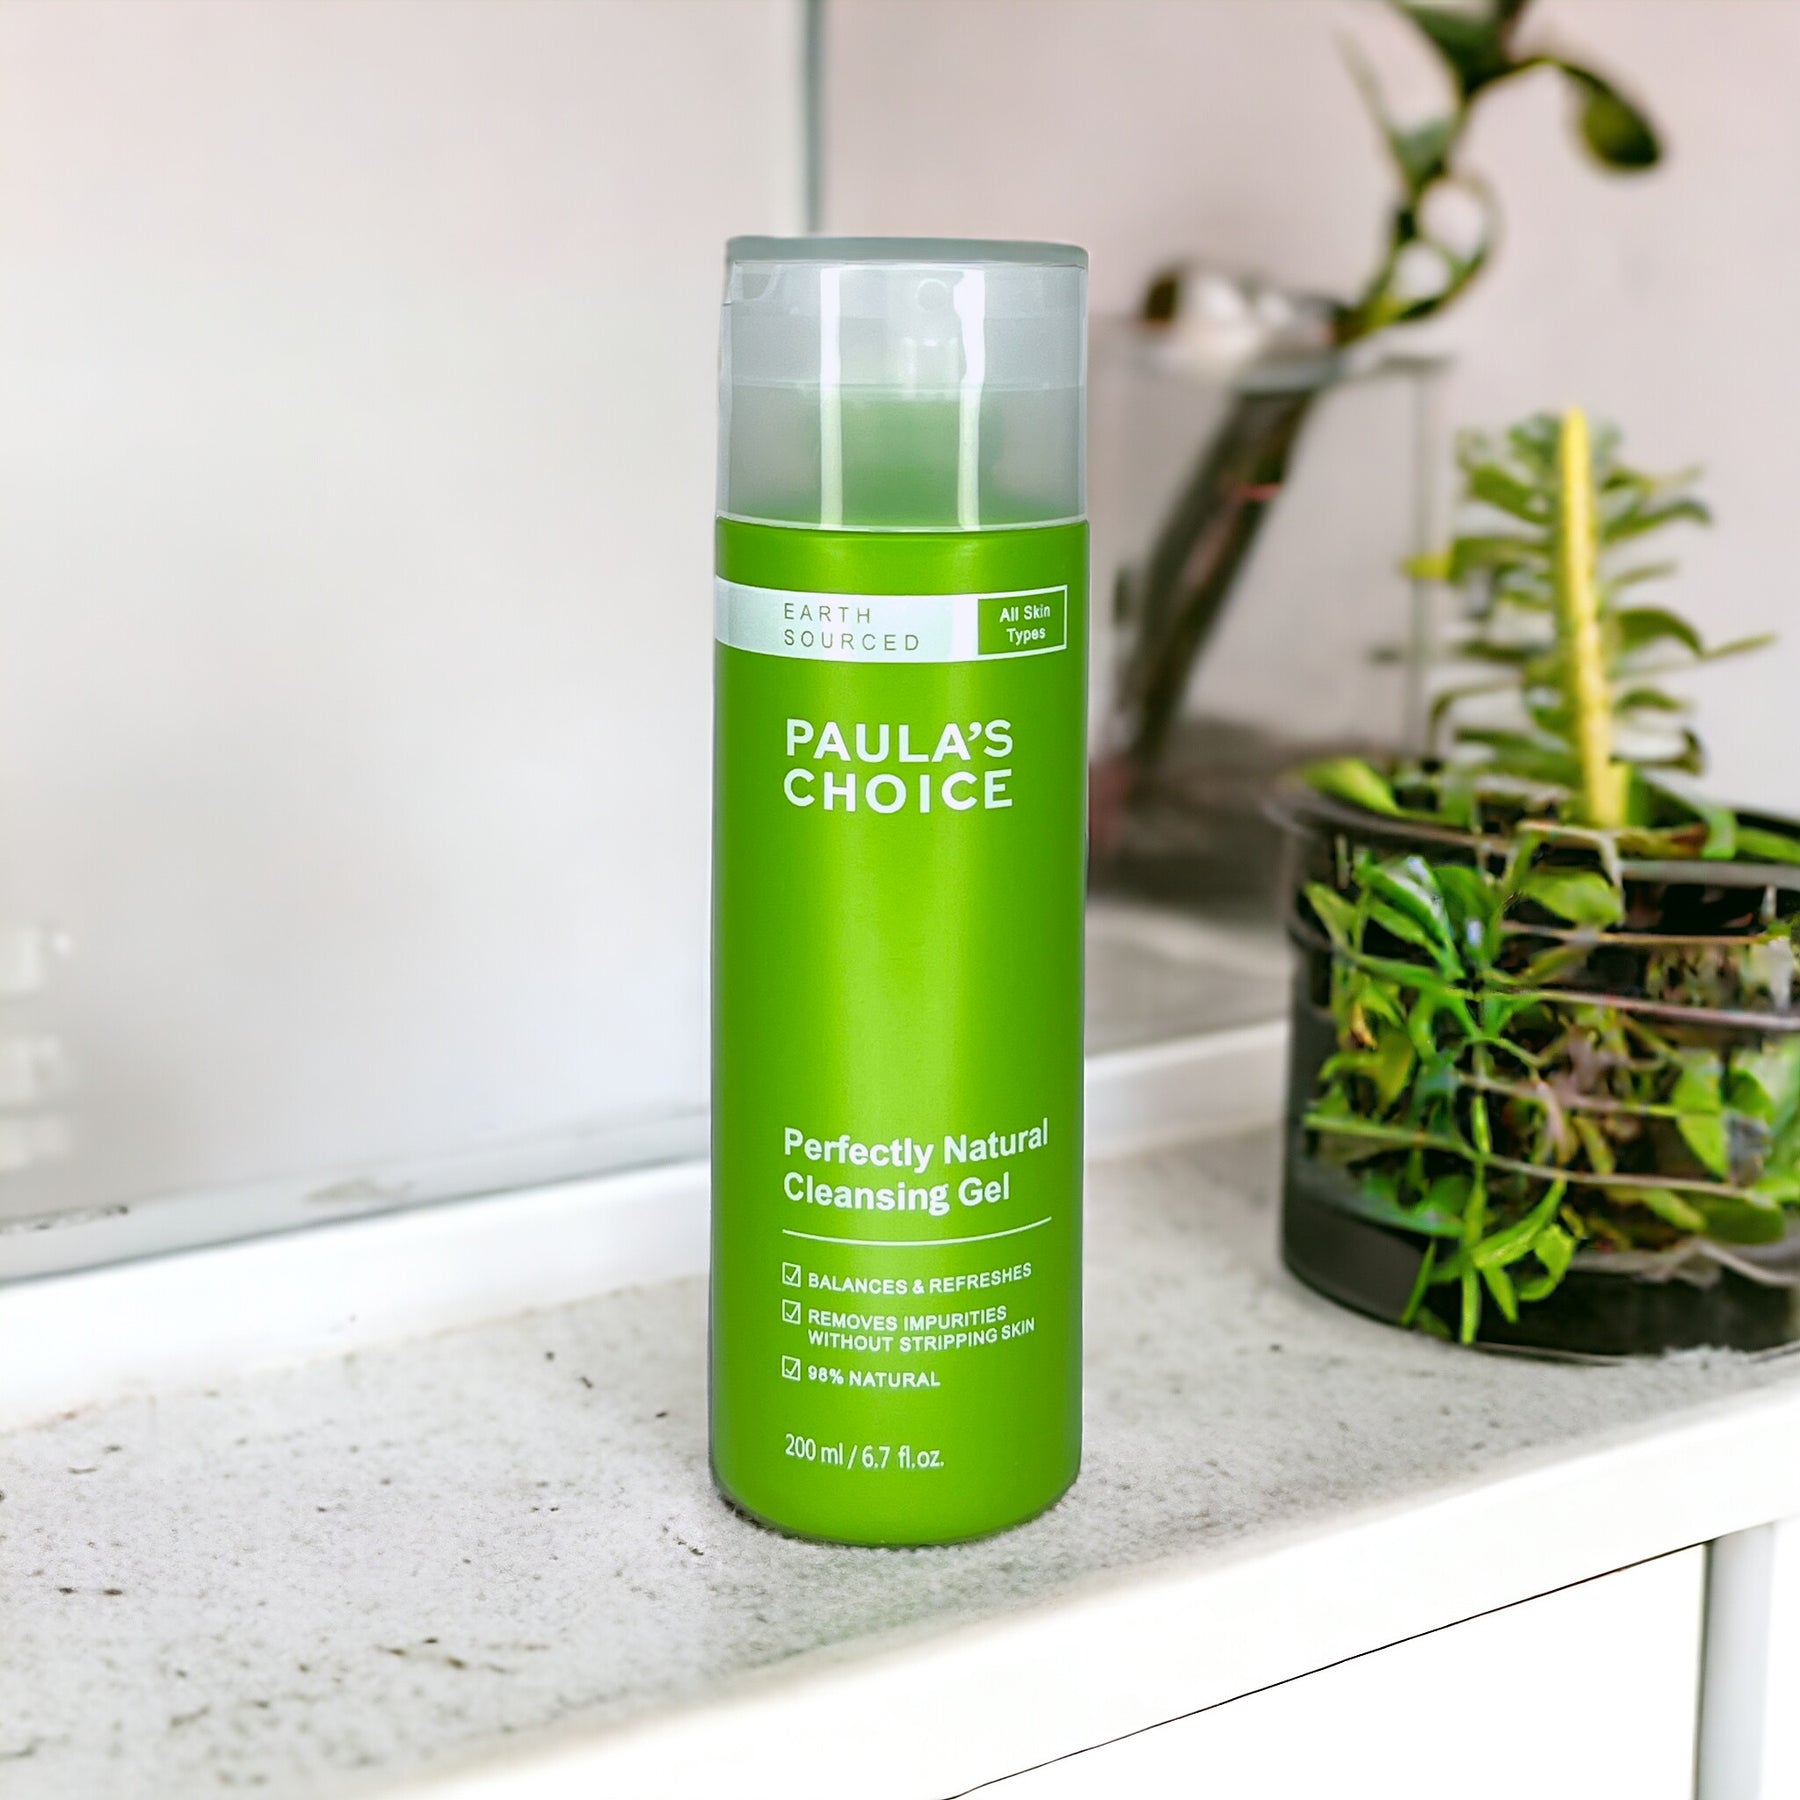 Paula's Choice Perfectly Natural Cleansing Gel